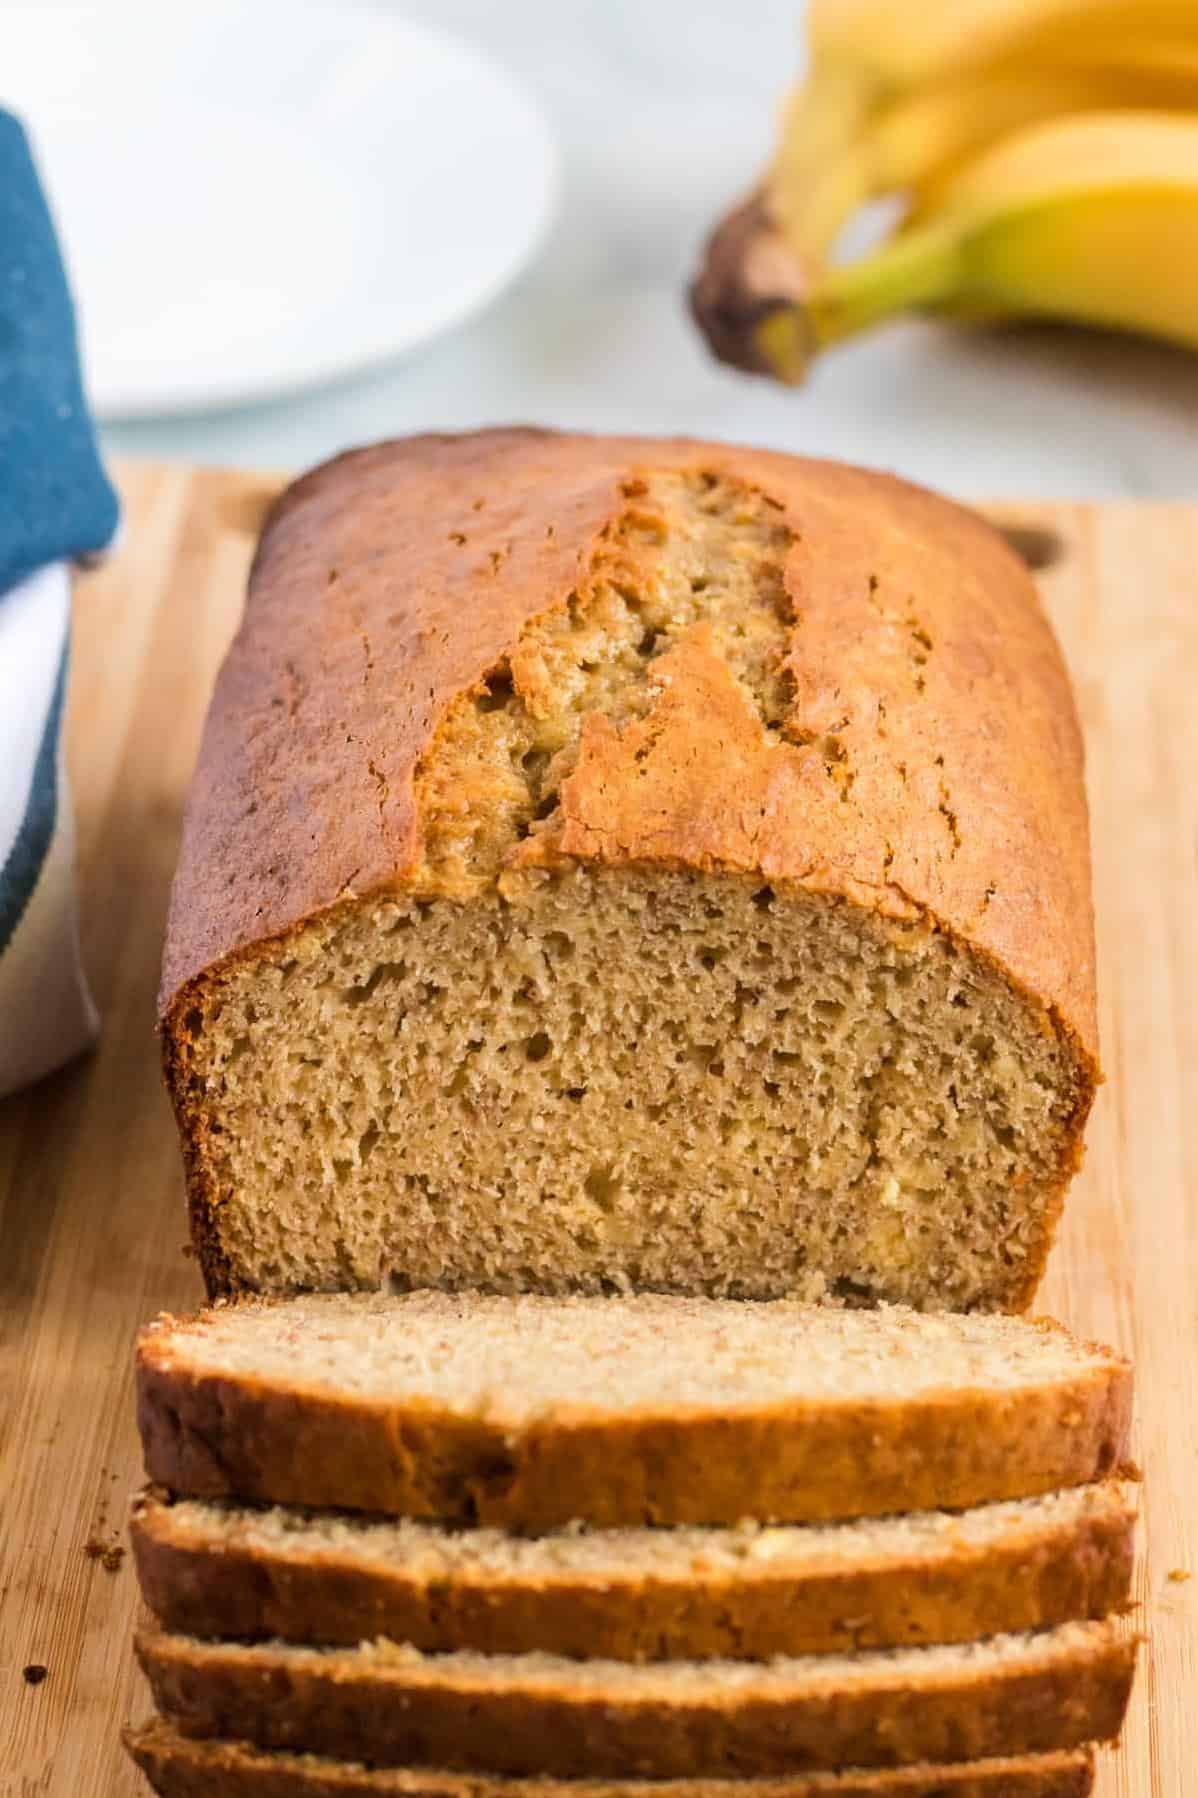  Indulge in the ultimate comfort food with Cake Mix Banana Nut Bread.